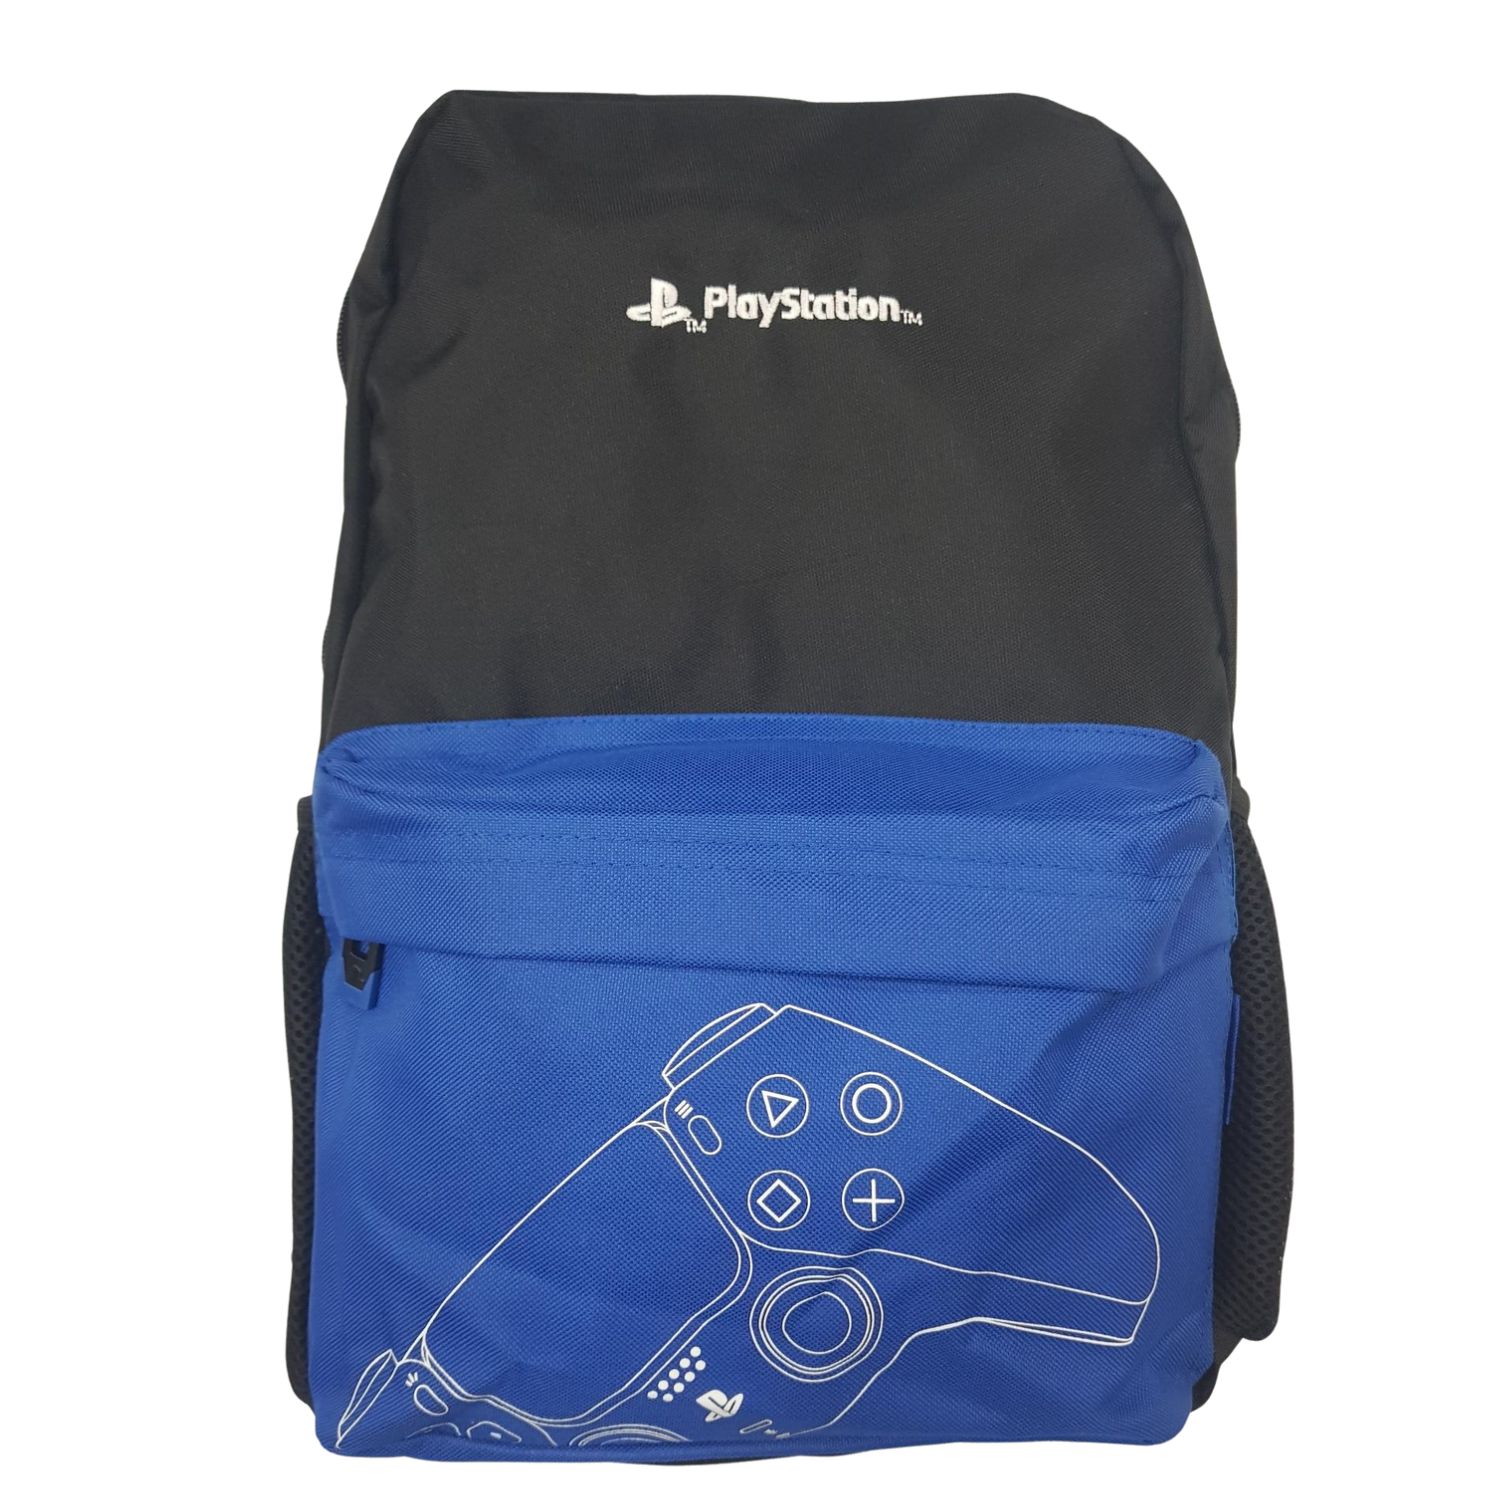 JR Playstation Backpack E0161 - Farias Trading Limited